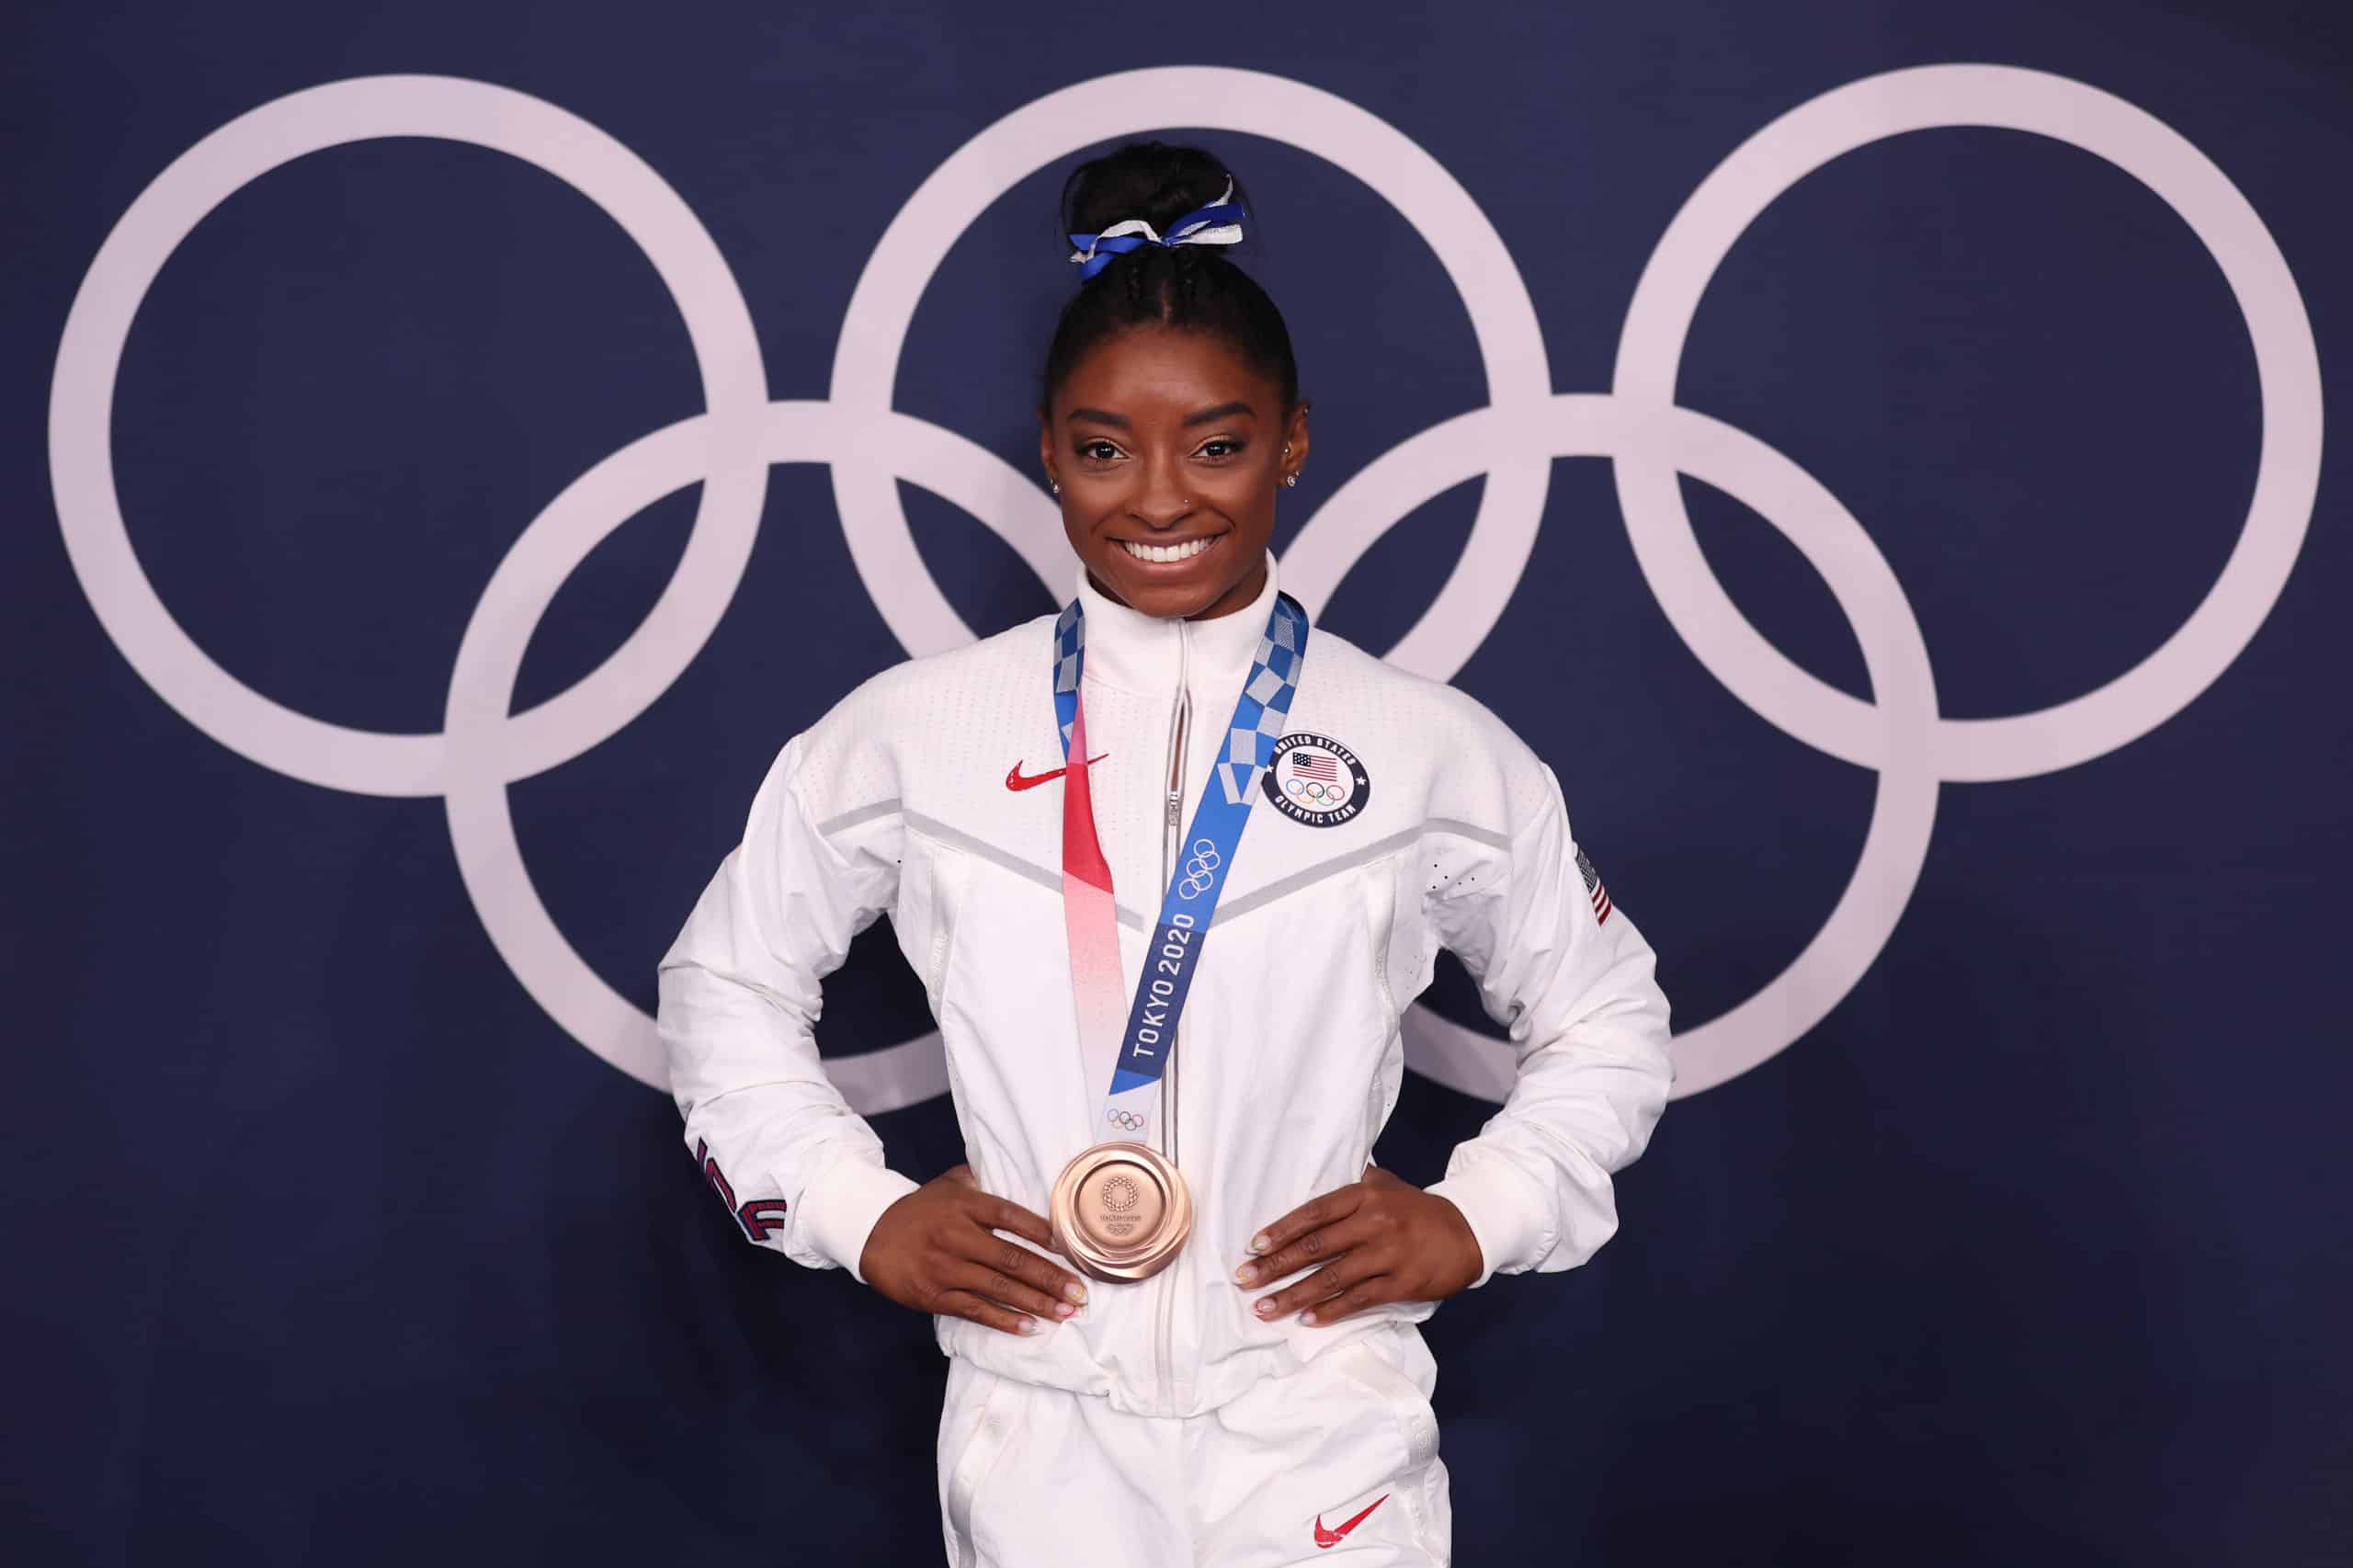 Simone Biles won a bronze medal during the women's balance beam competition, giving her, her 7th overall Olympic medal.